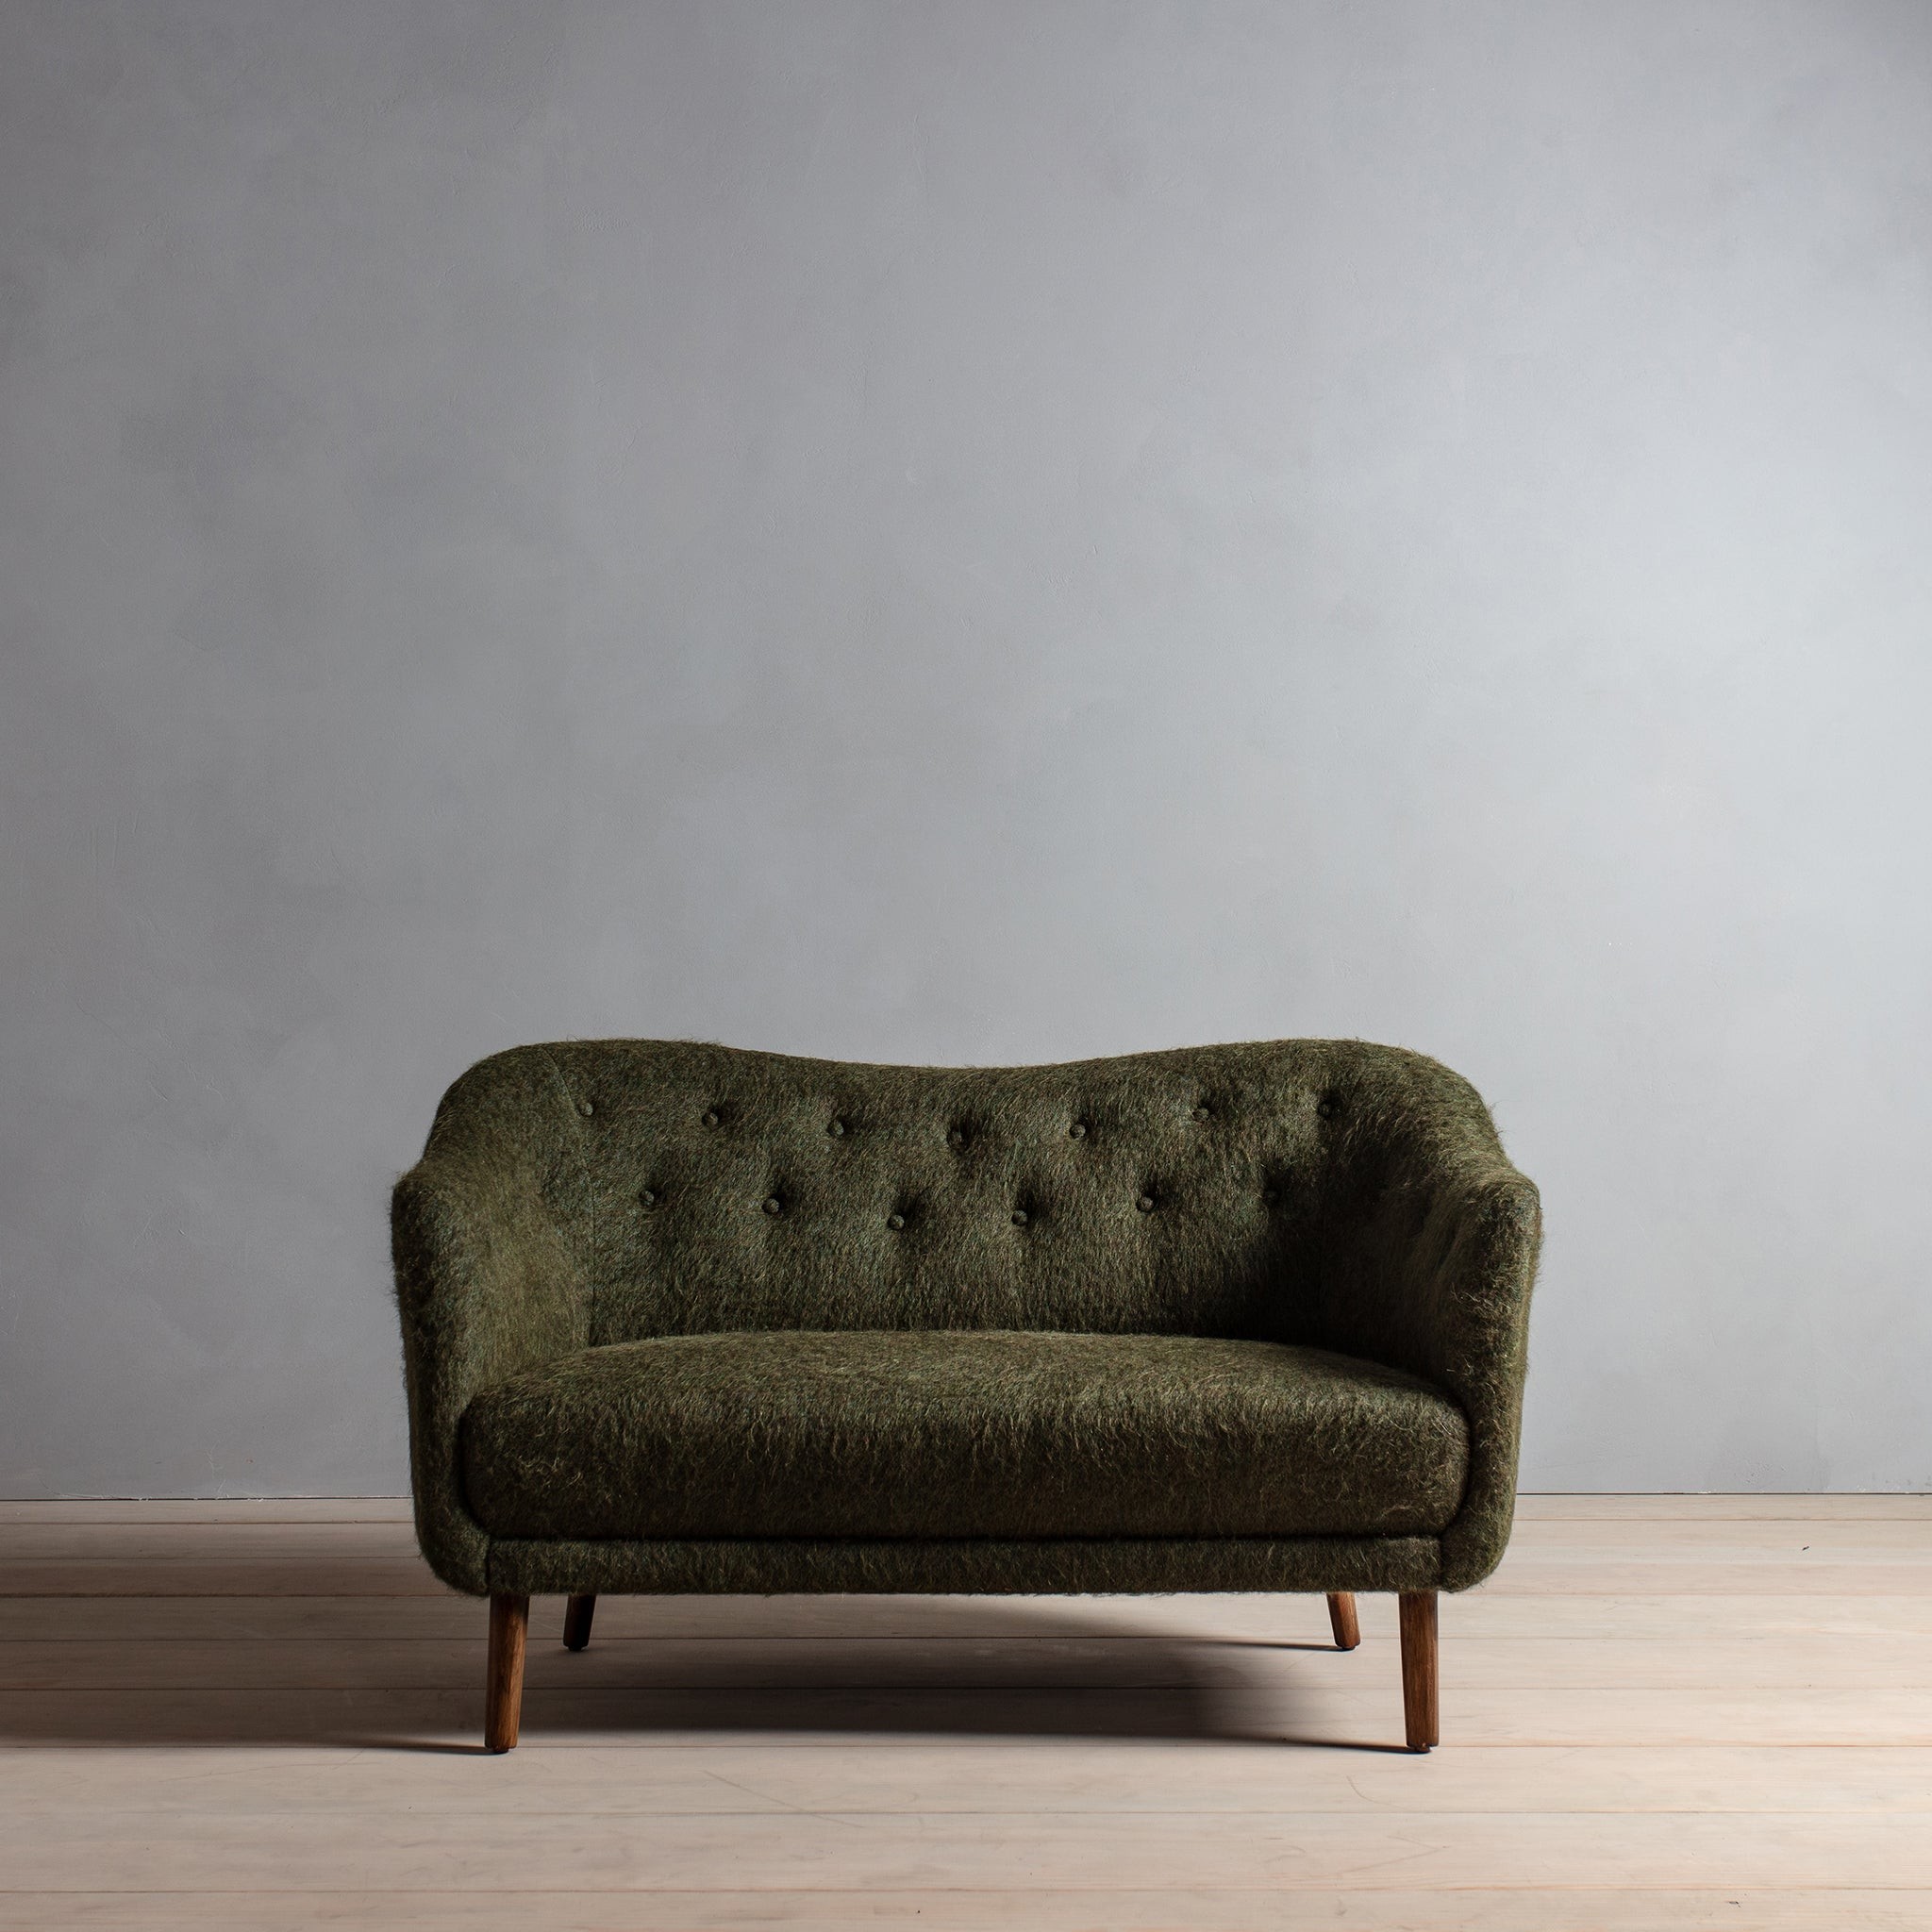 The image of an Danish Cabinetmaker mid-century sofa product